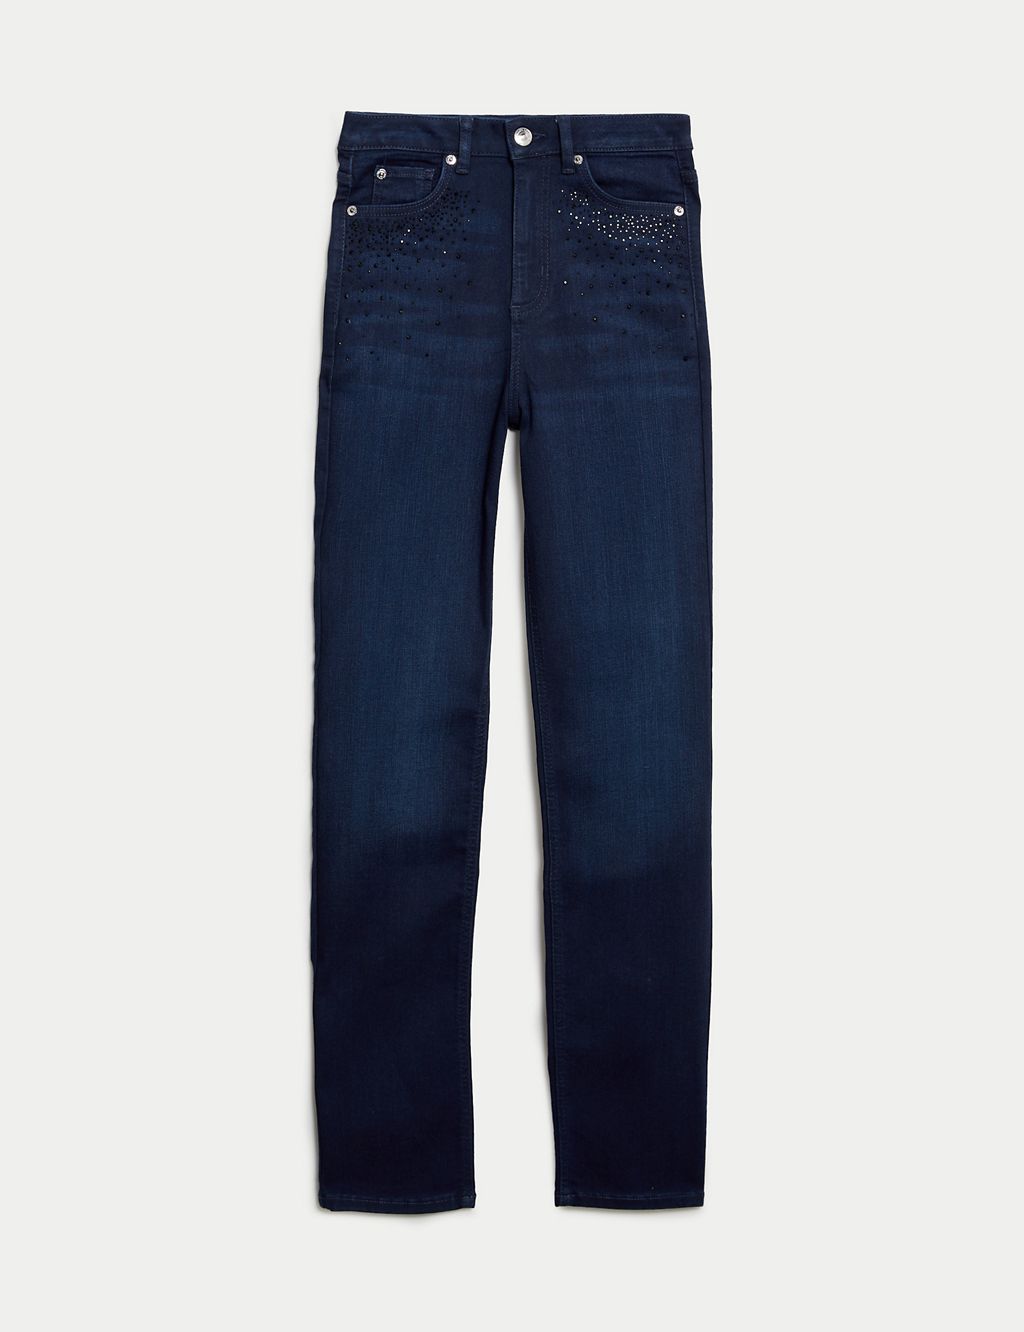 High Waisted Embellished Straight Leg Jeans 1 of 7